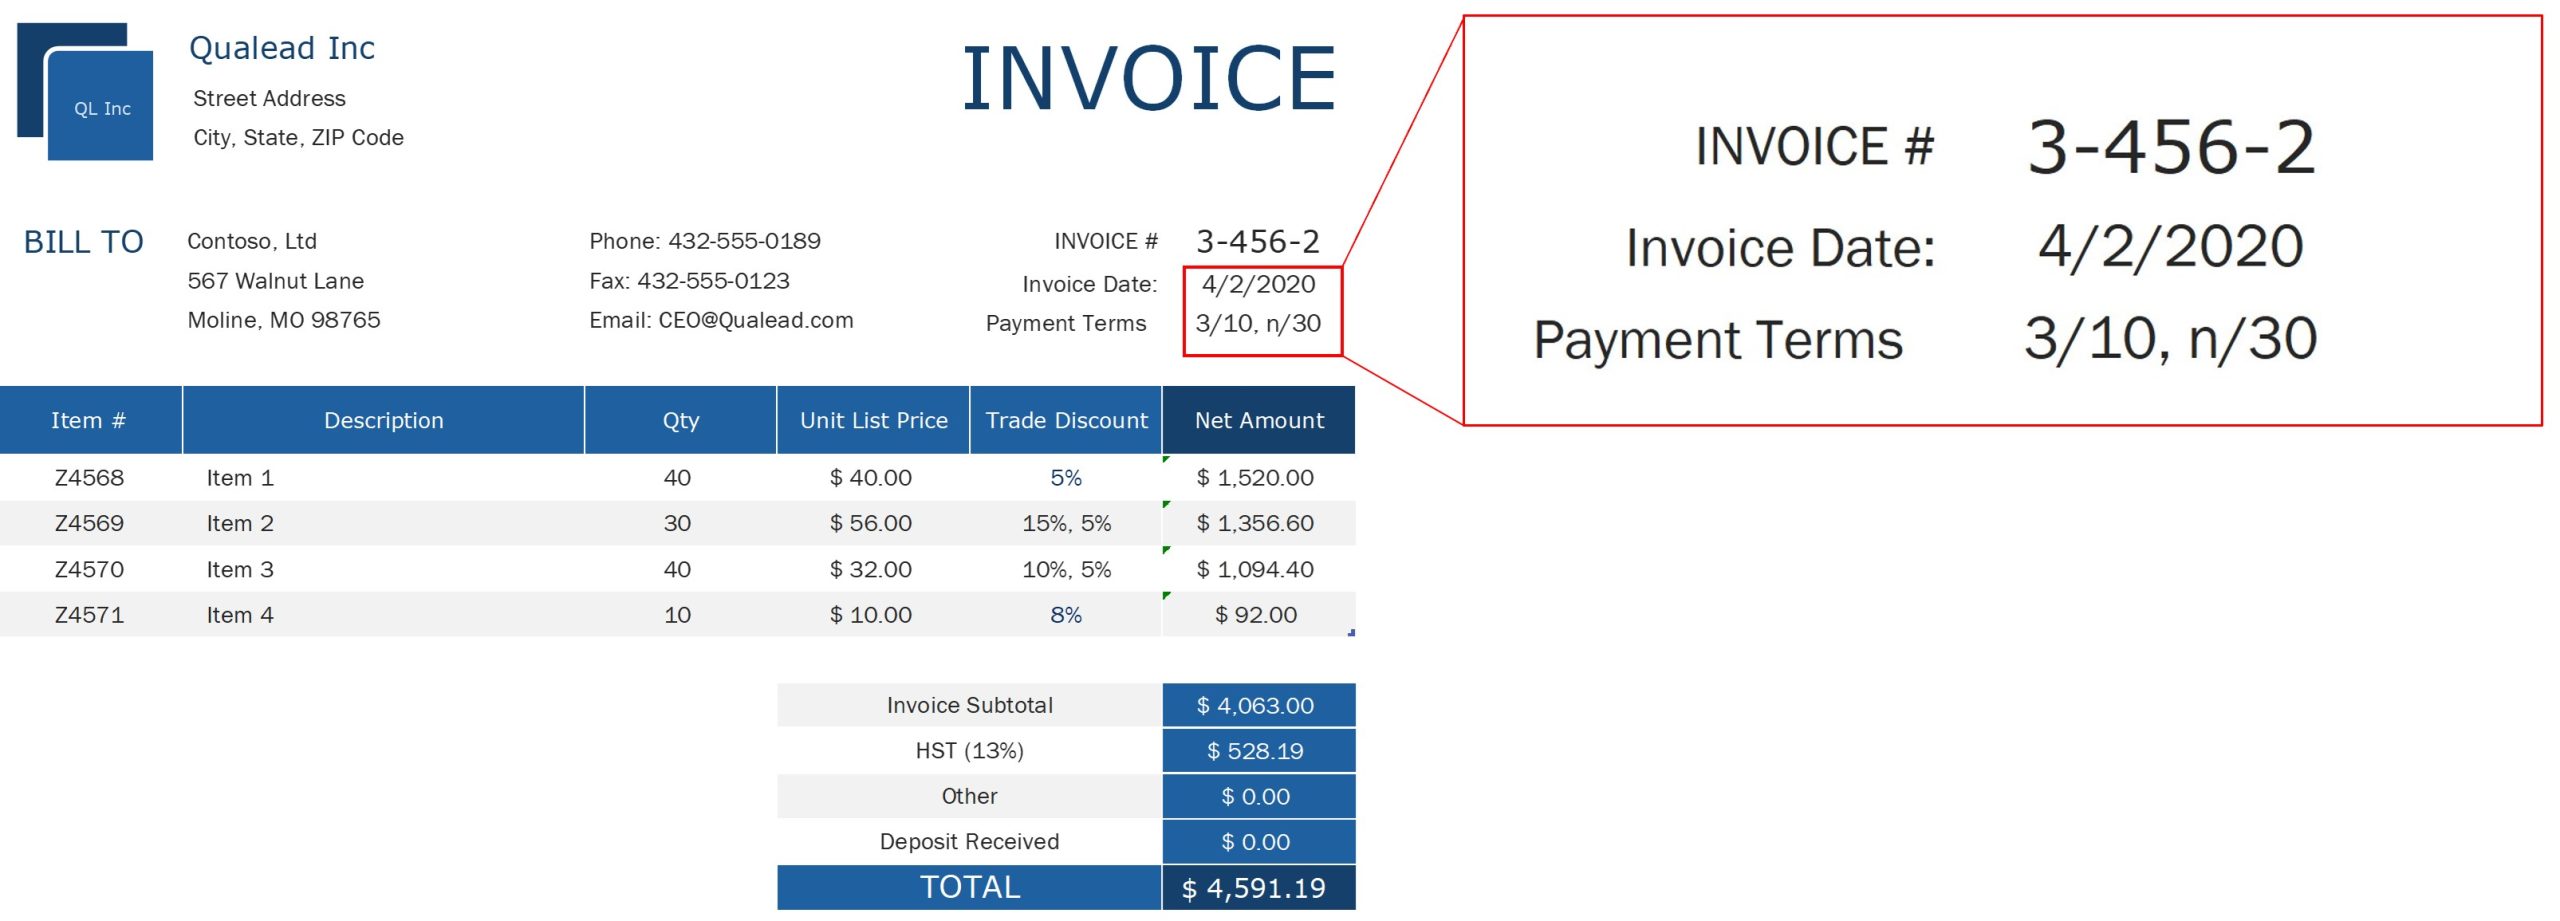 Brief visual representation of a sample invoice highlighting the payment terms '3/10, n/30'.